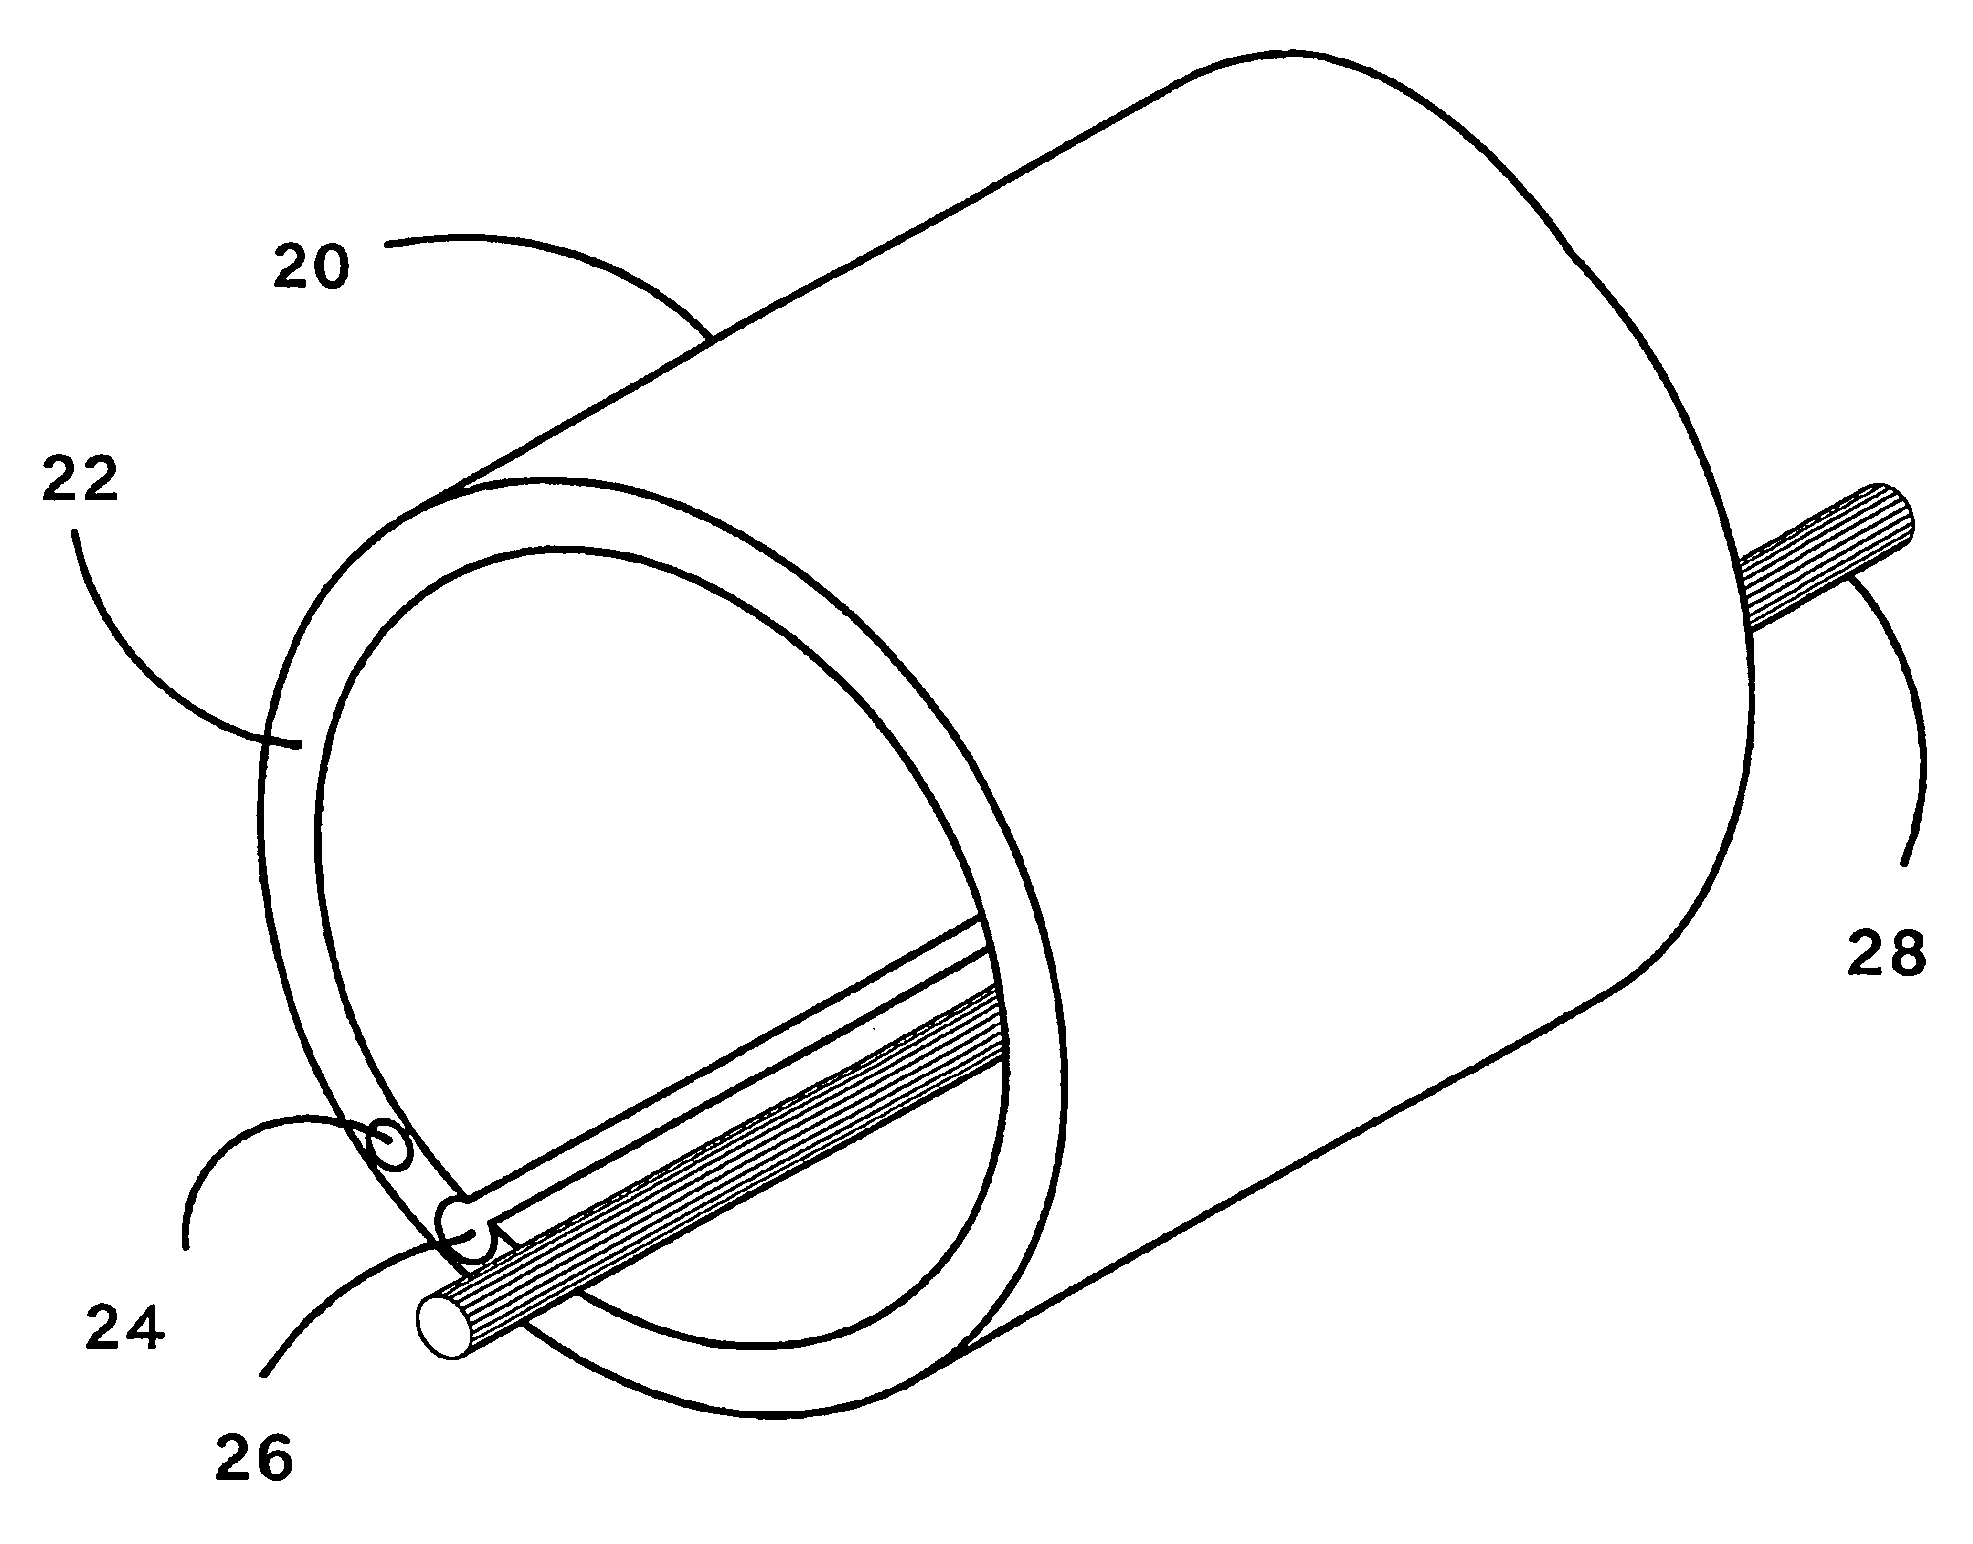 Tube for inspecting internal organs of a body